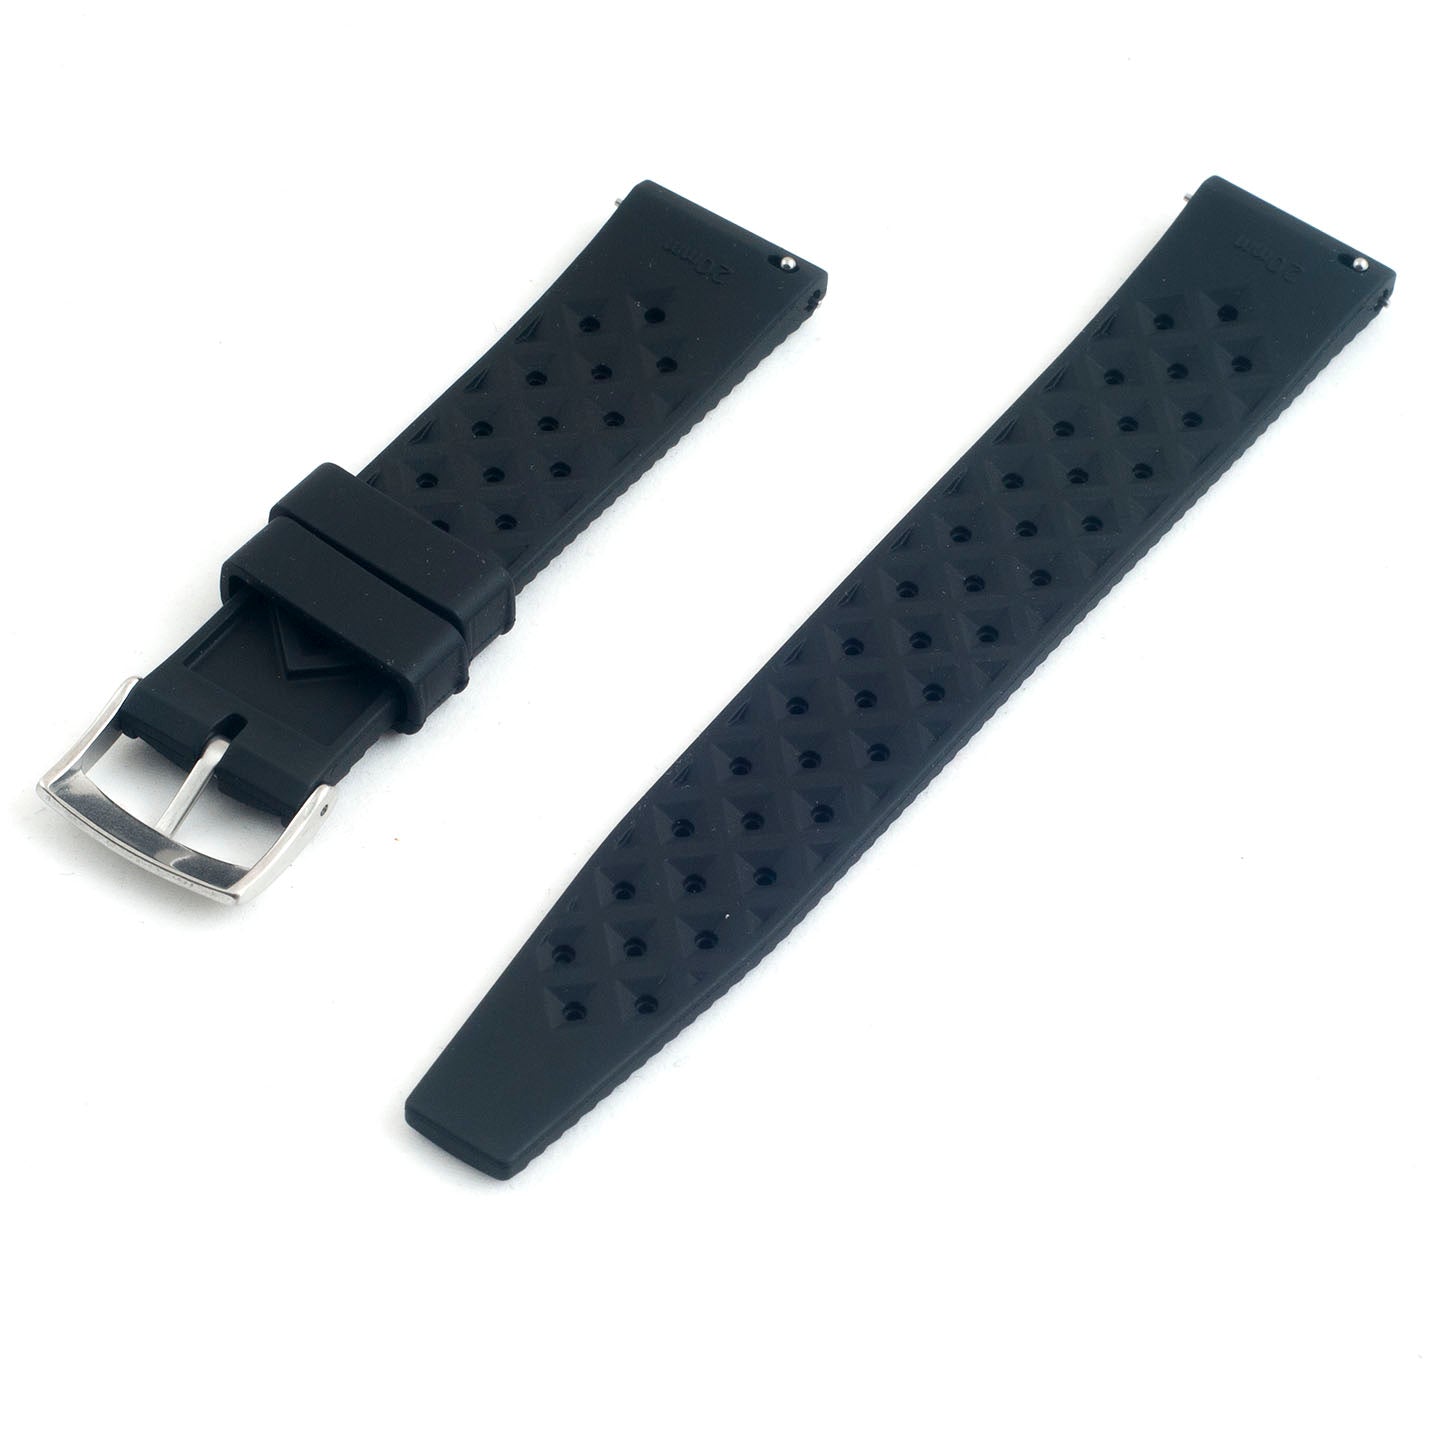 Tropical retro vintage replacement watch strap band FKM rubber tropic 19mm 20mm 21mm 22mm black